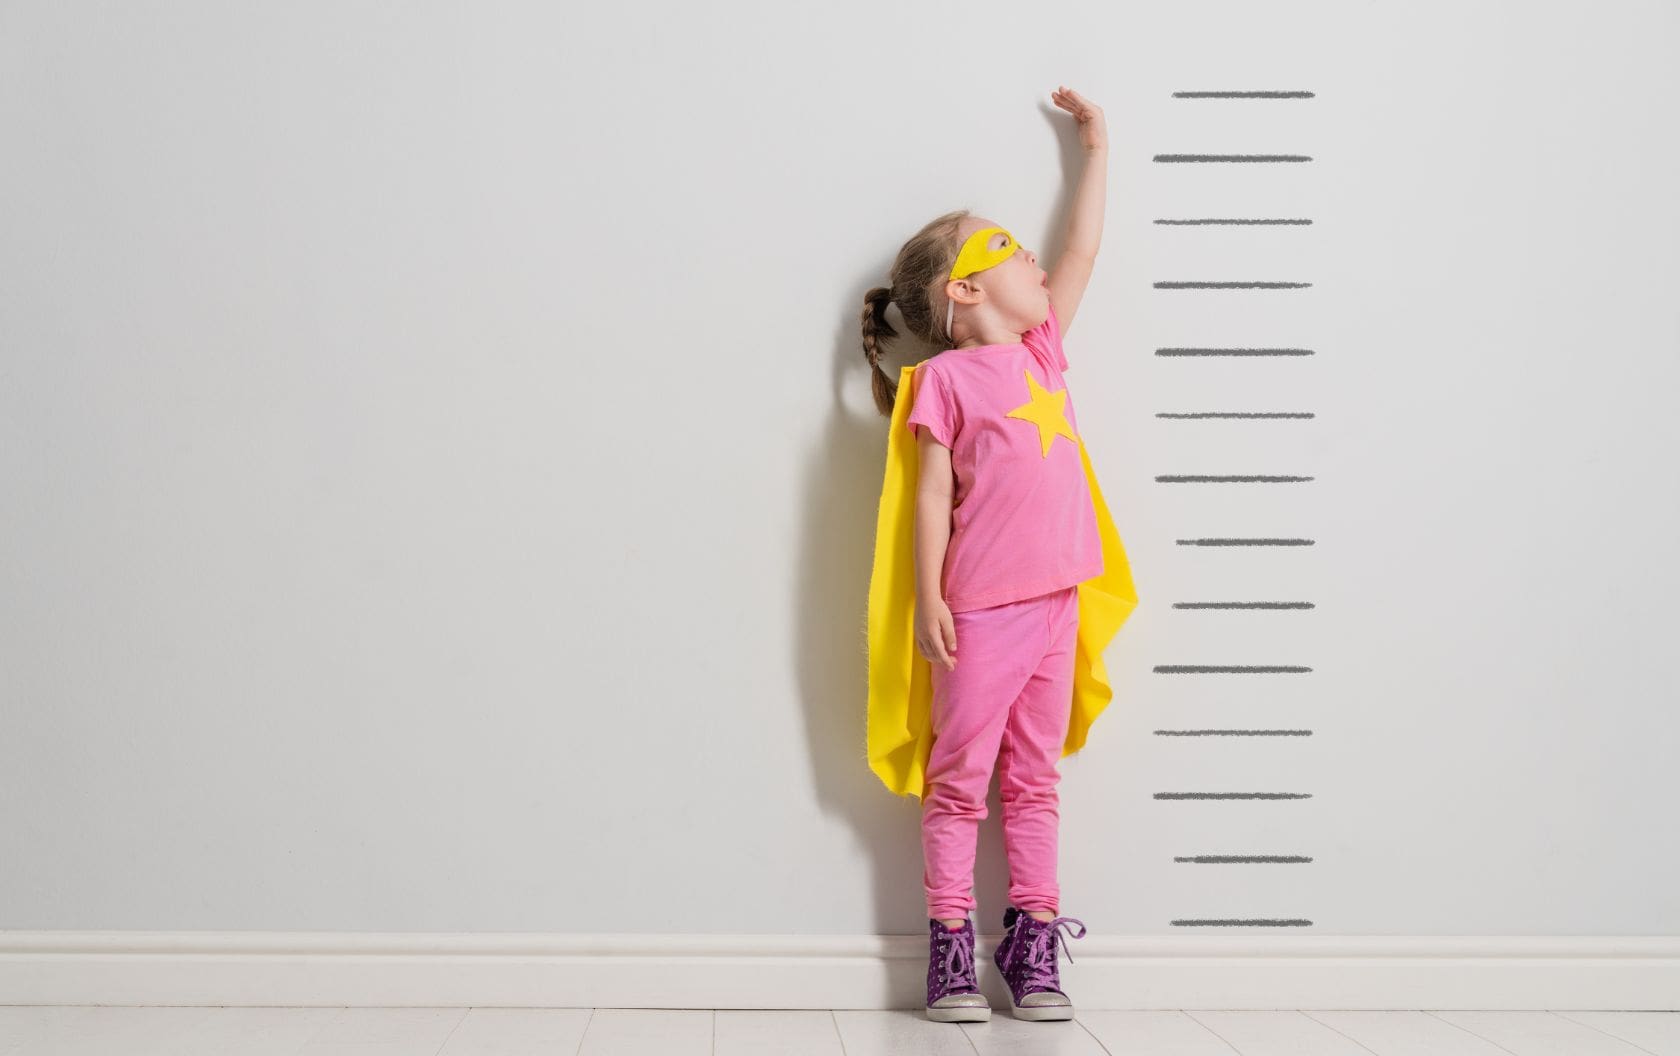 A future business owner as a child in a superhero costume standing on her tip toes trying to grow next to a wall with a height measurement drawn on it which is taller than her.